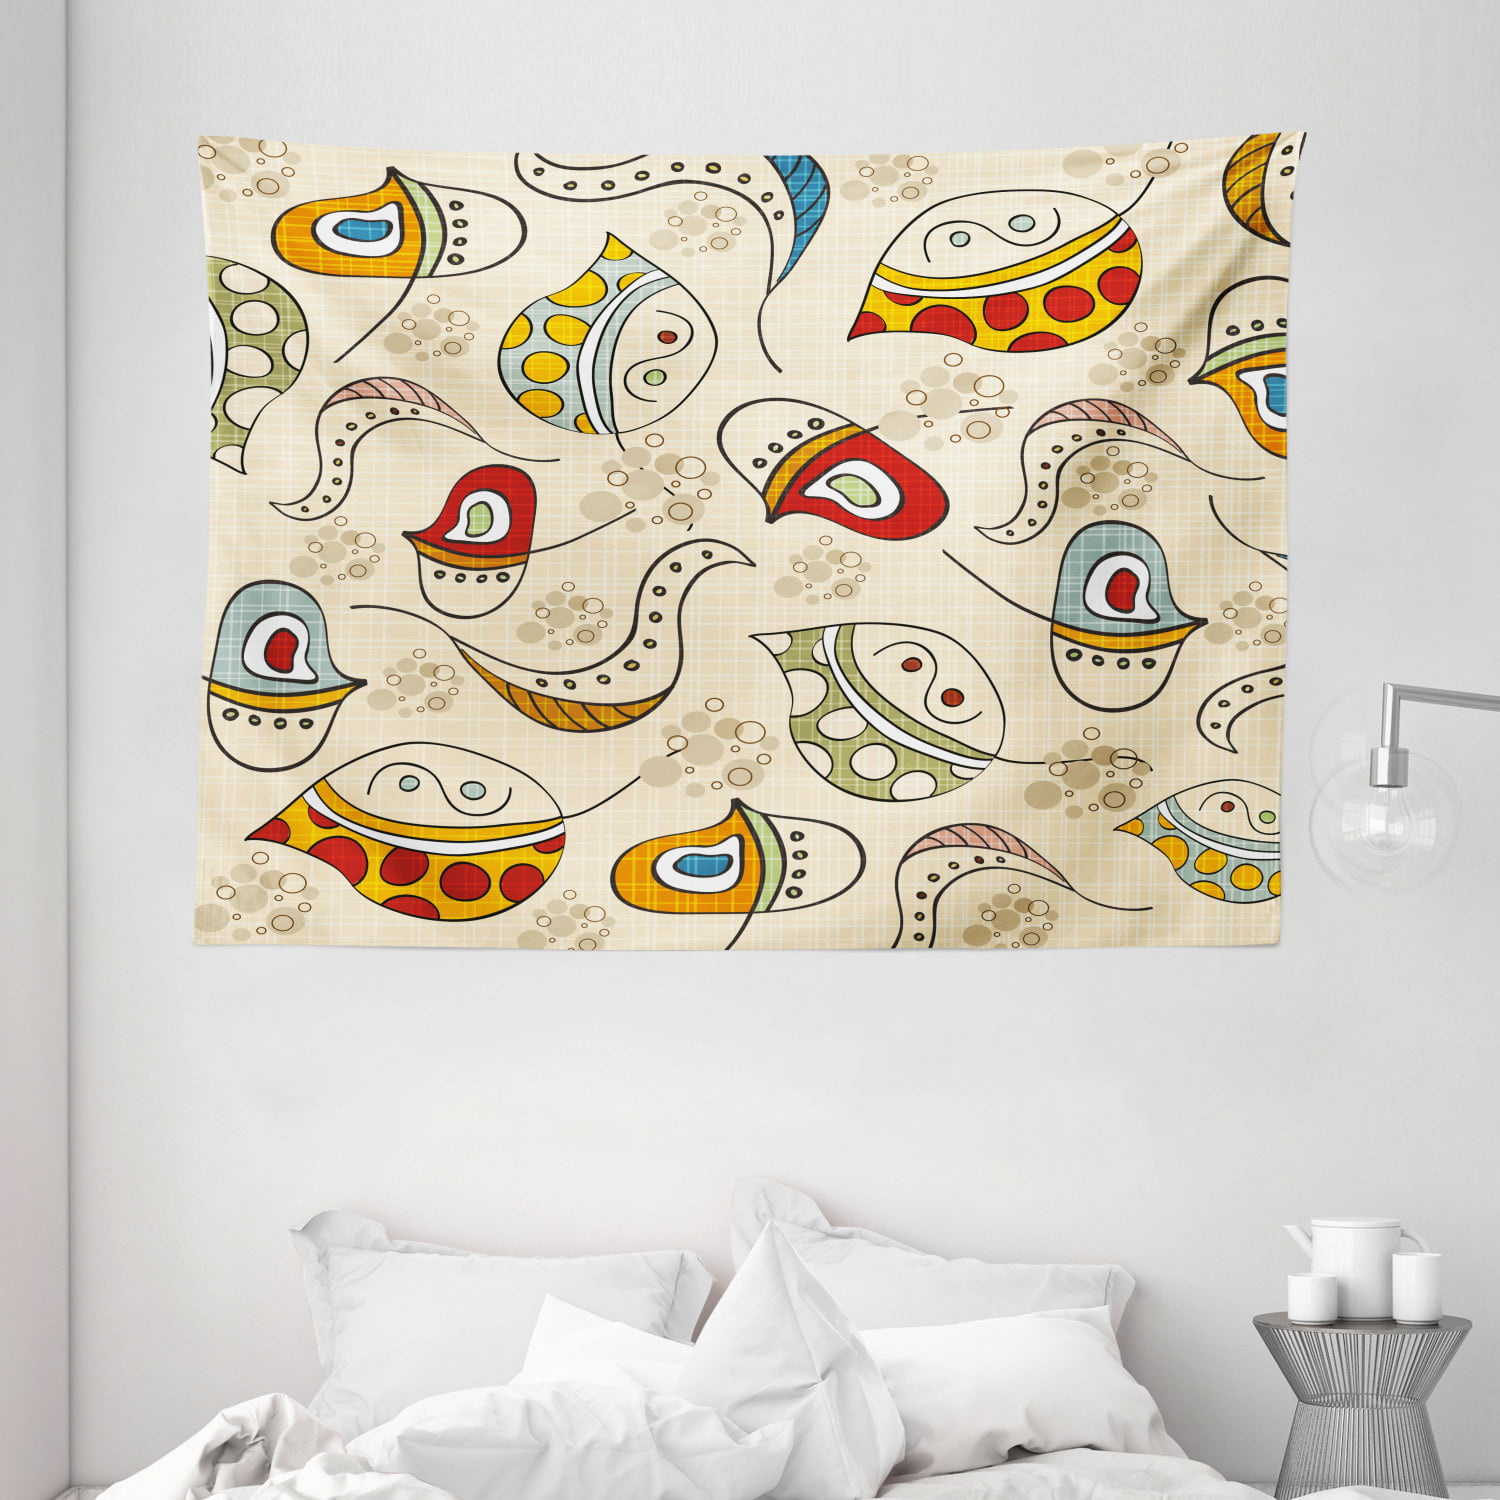 Cartoon Figure Wall Hanging Children's Art Wall Hanging Decorative for Bedroom Dorm Decor Creative Tapestry Polyester Fabric Tapestry